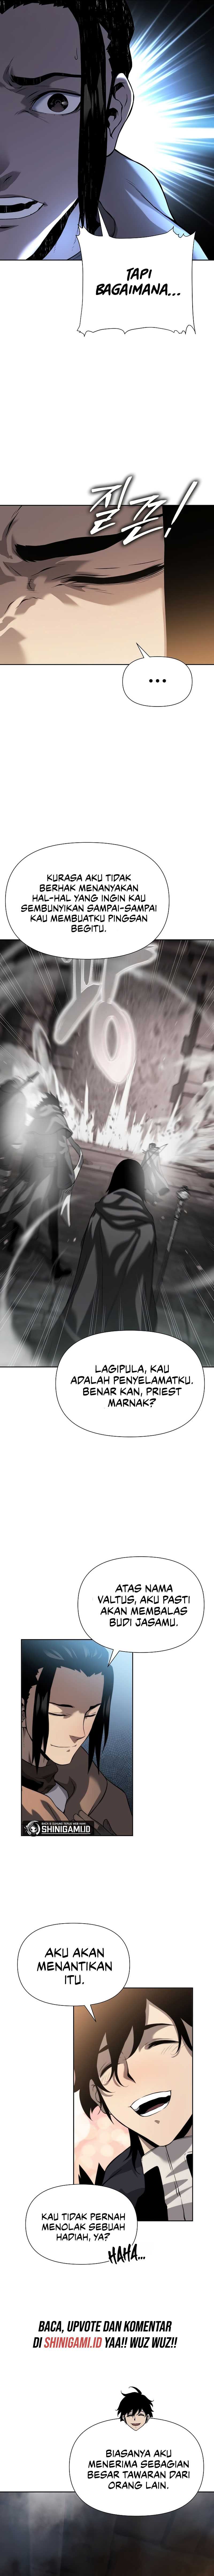 The Priest Of Corruption Chapter 08